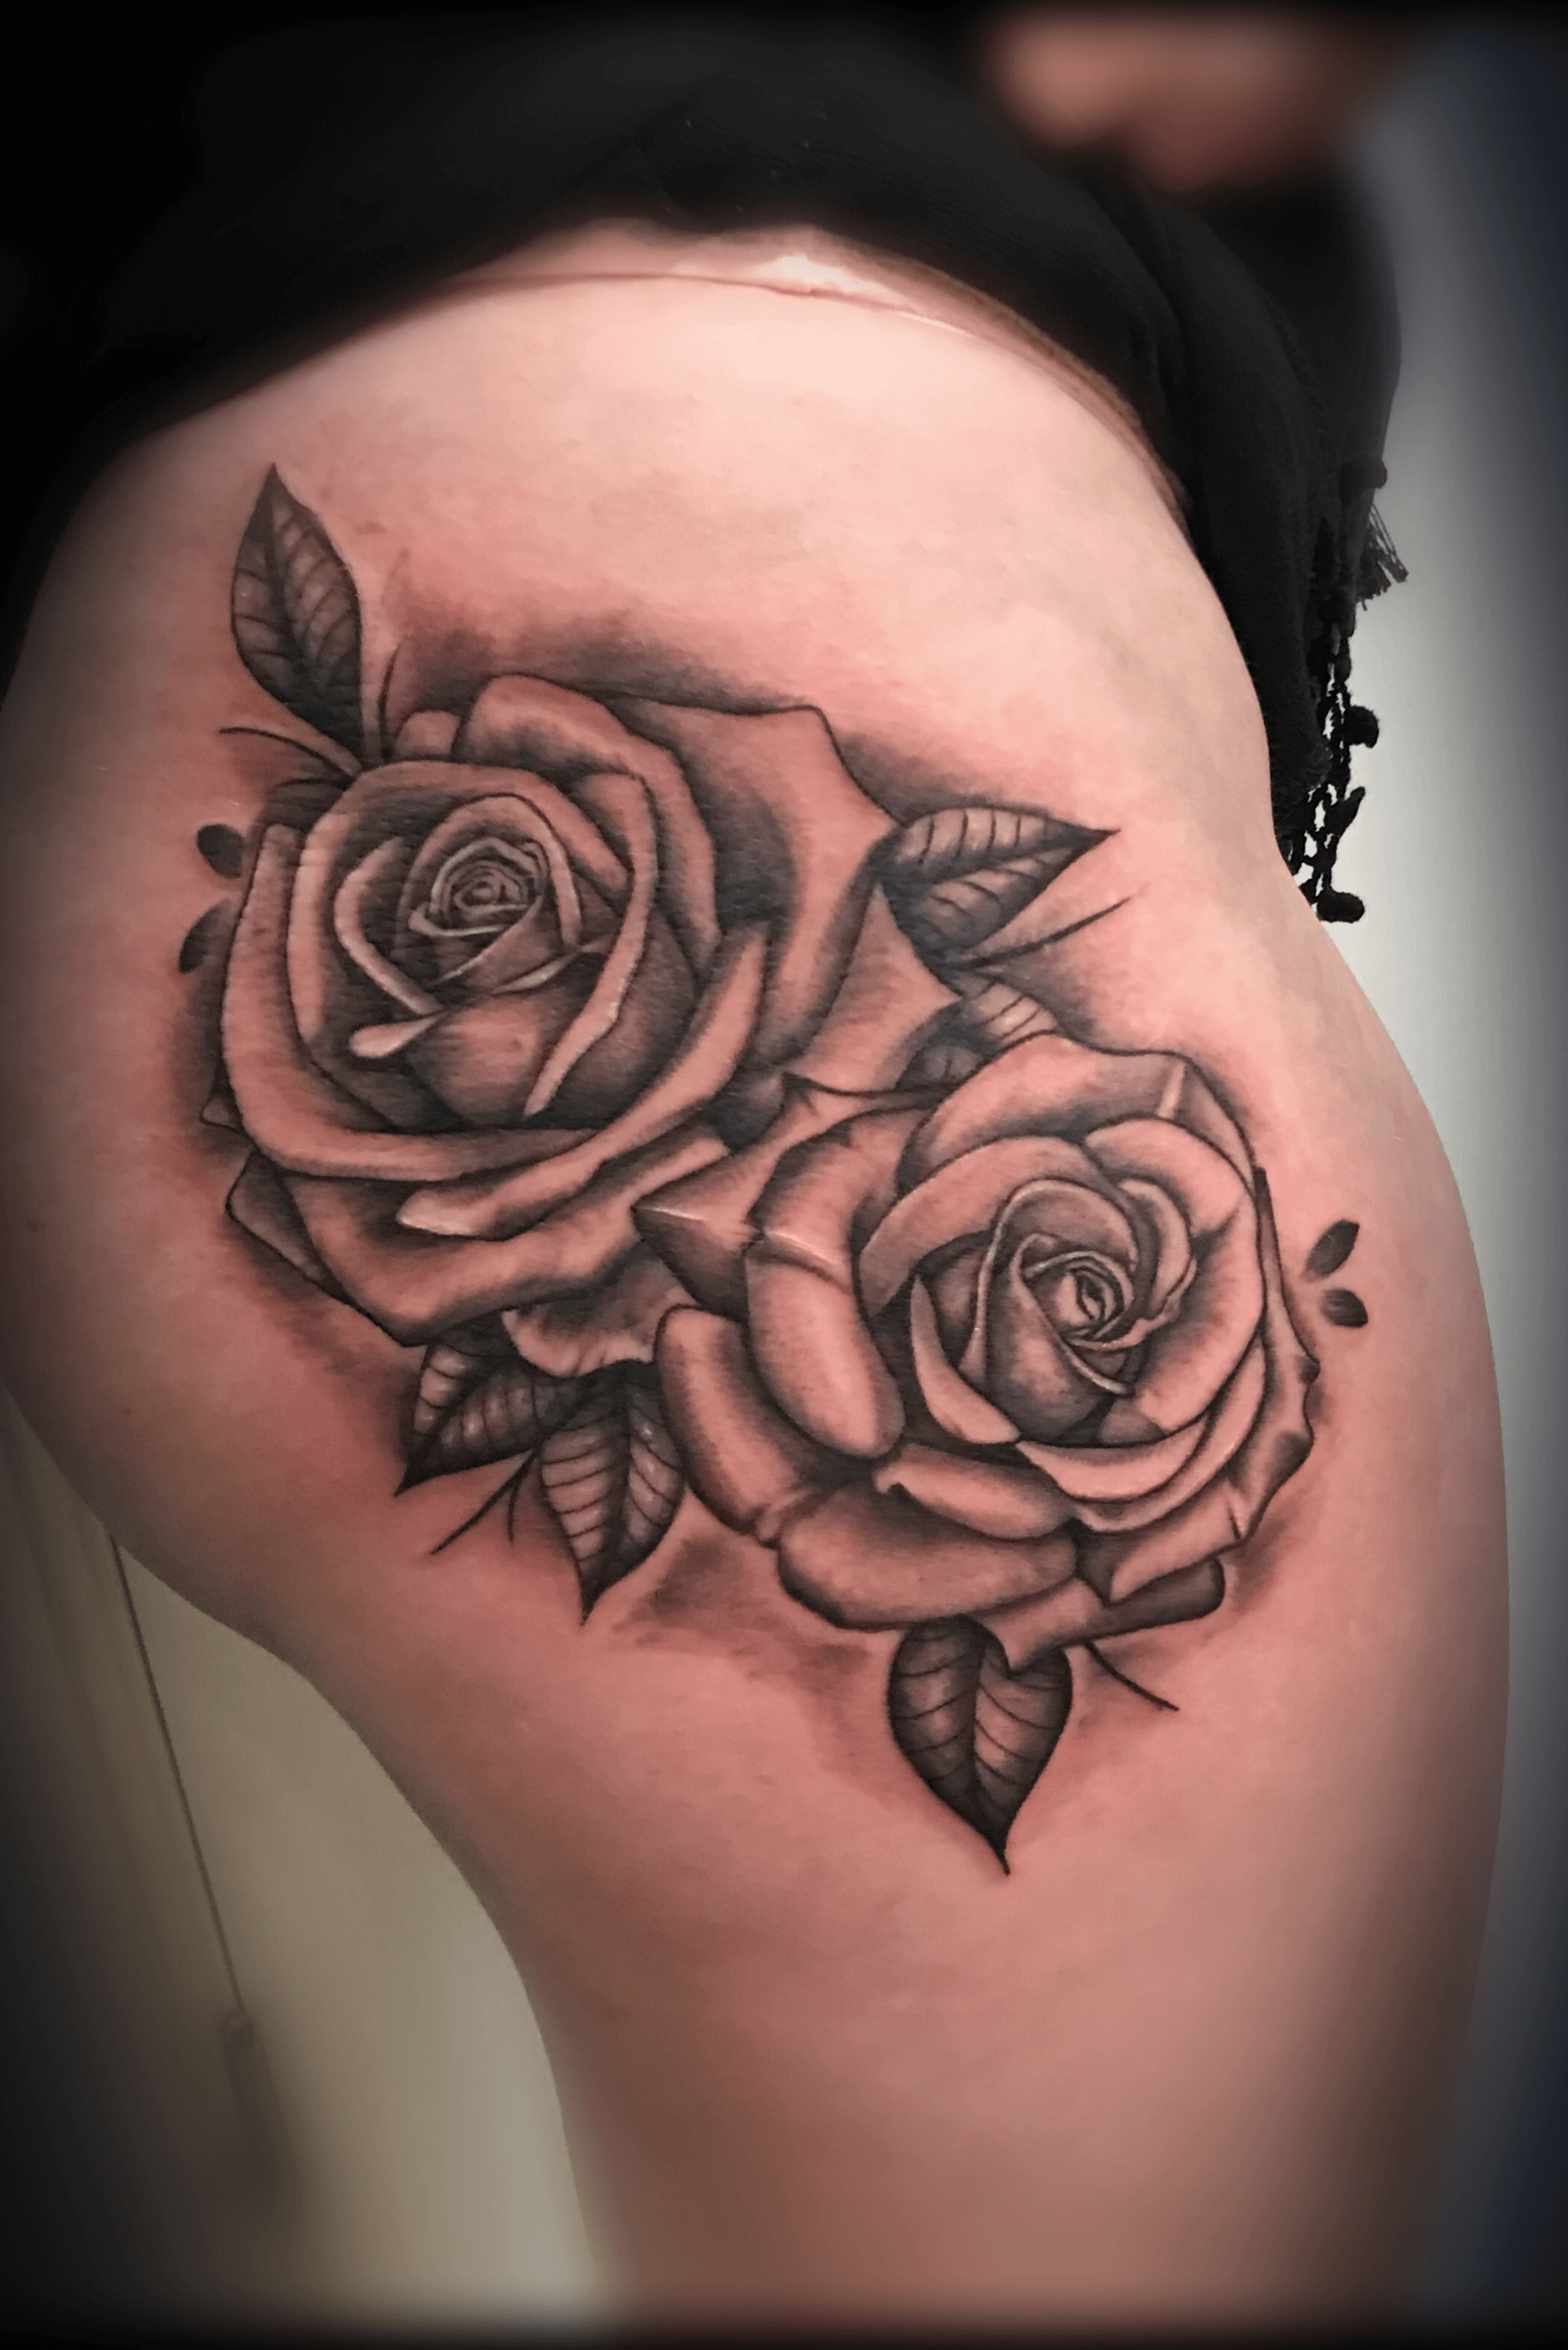 Sith Tattoo Studio  Anis black and grey roses design Shes starting